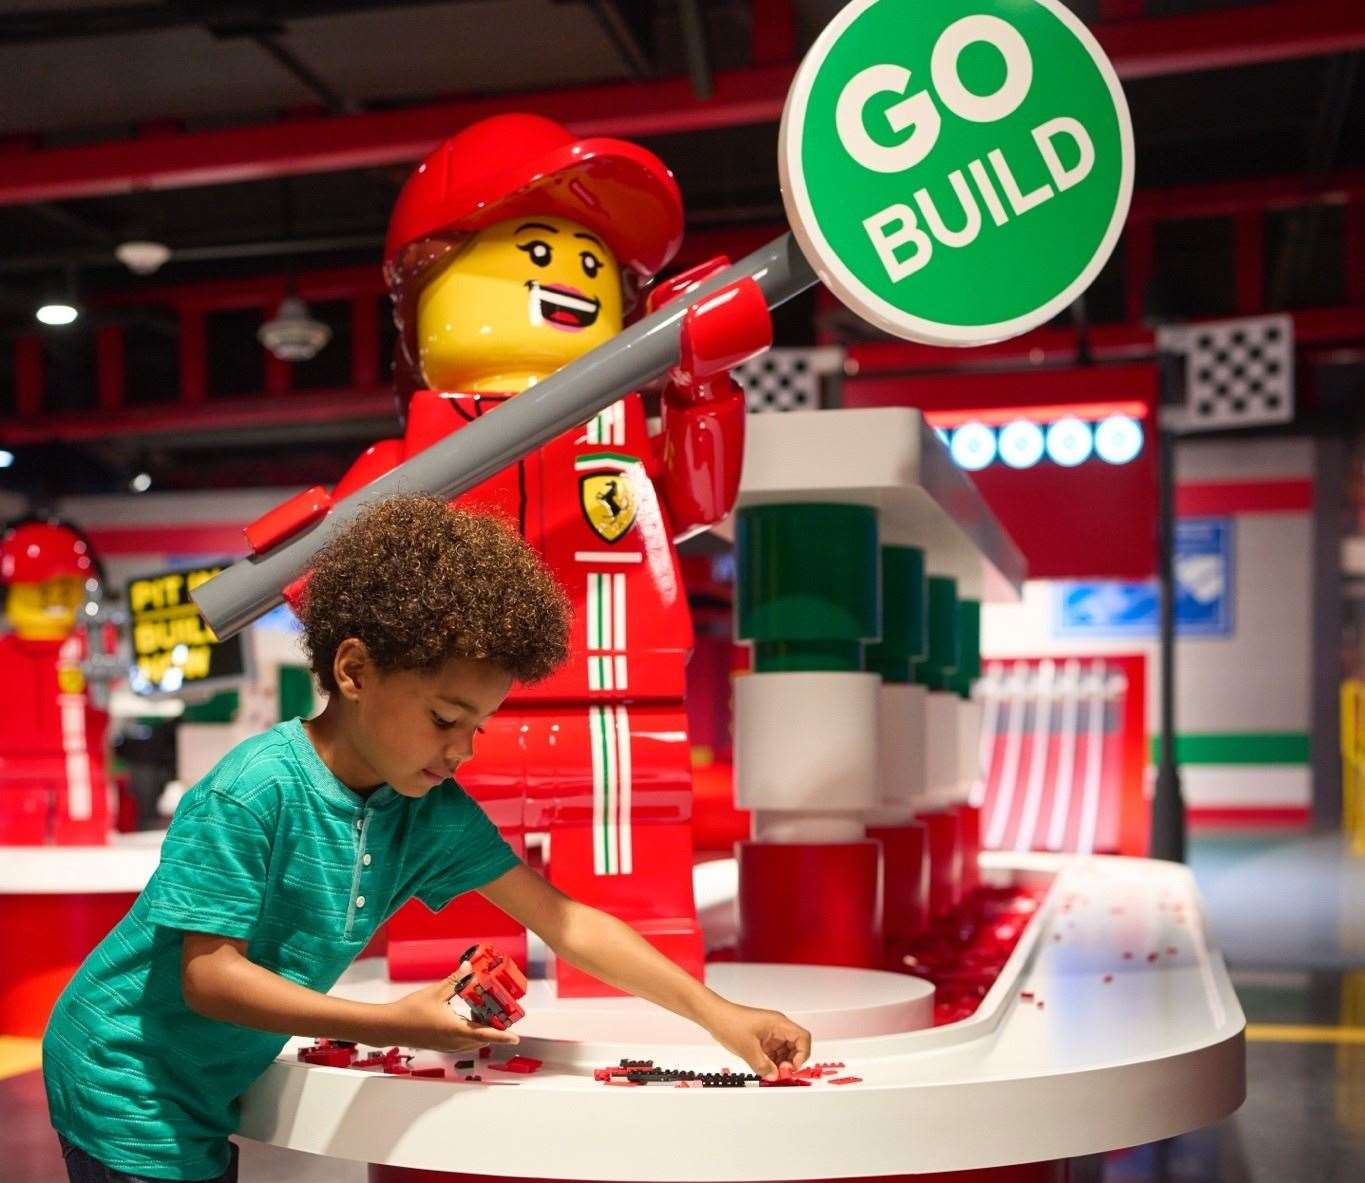 Legoland Race and Build is coming to Legoland Windsor this summer